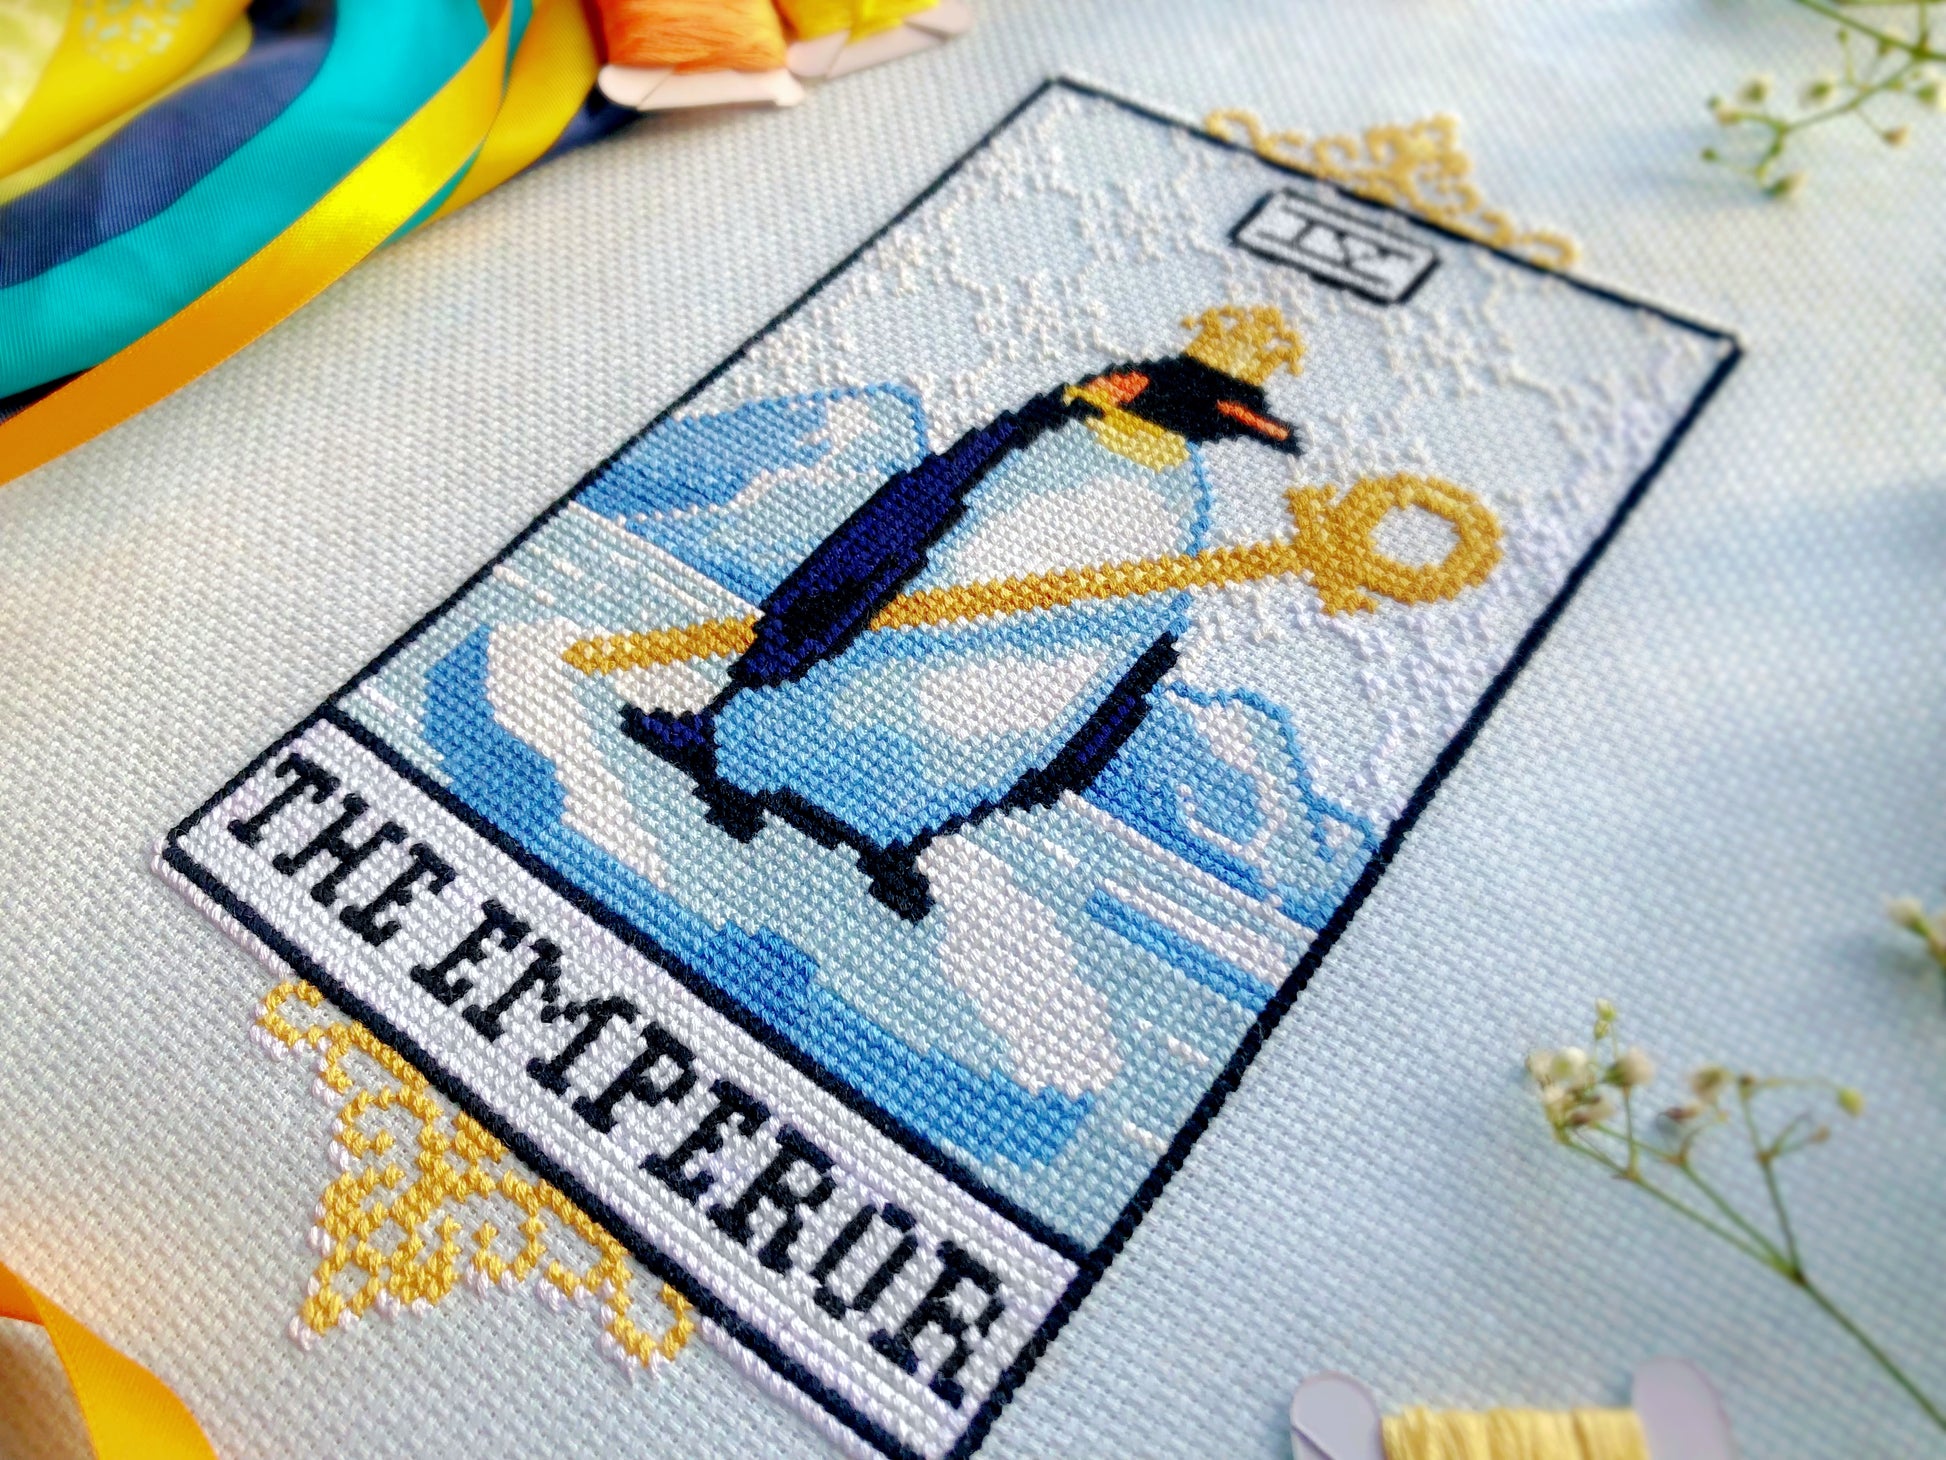 Closeup of the Emperor tarot cross stitch pattern. Image is focused on the lower right corner of the design. Emperor penguin is standing proudly in his attire on a block of ice, surrounded by water and icebergs. The frame is that of a tarot card.